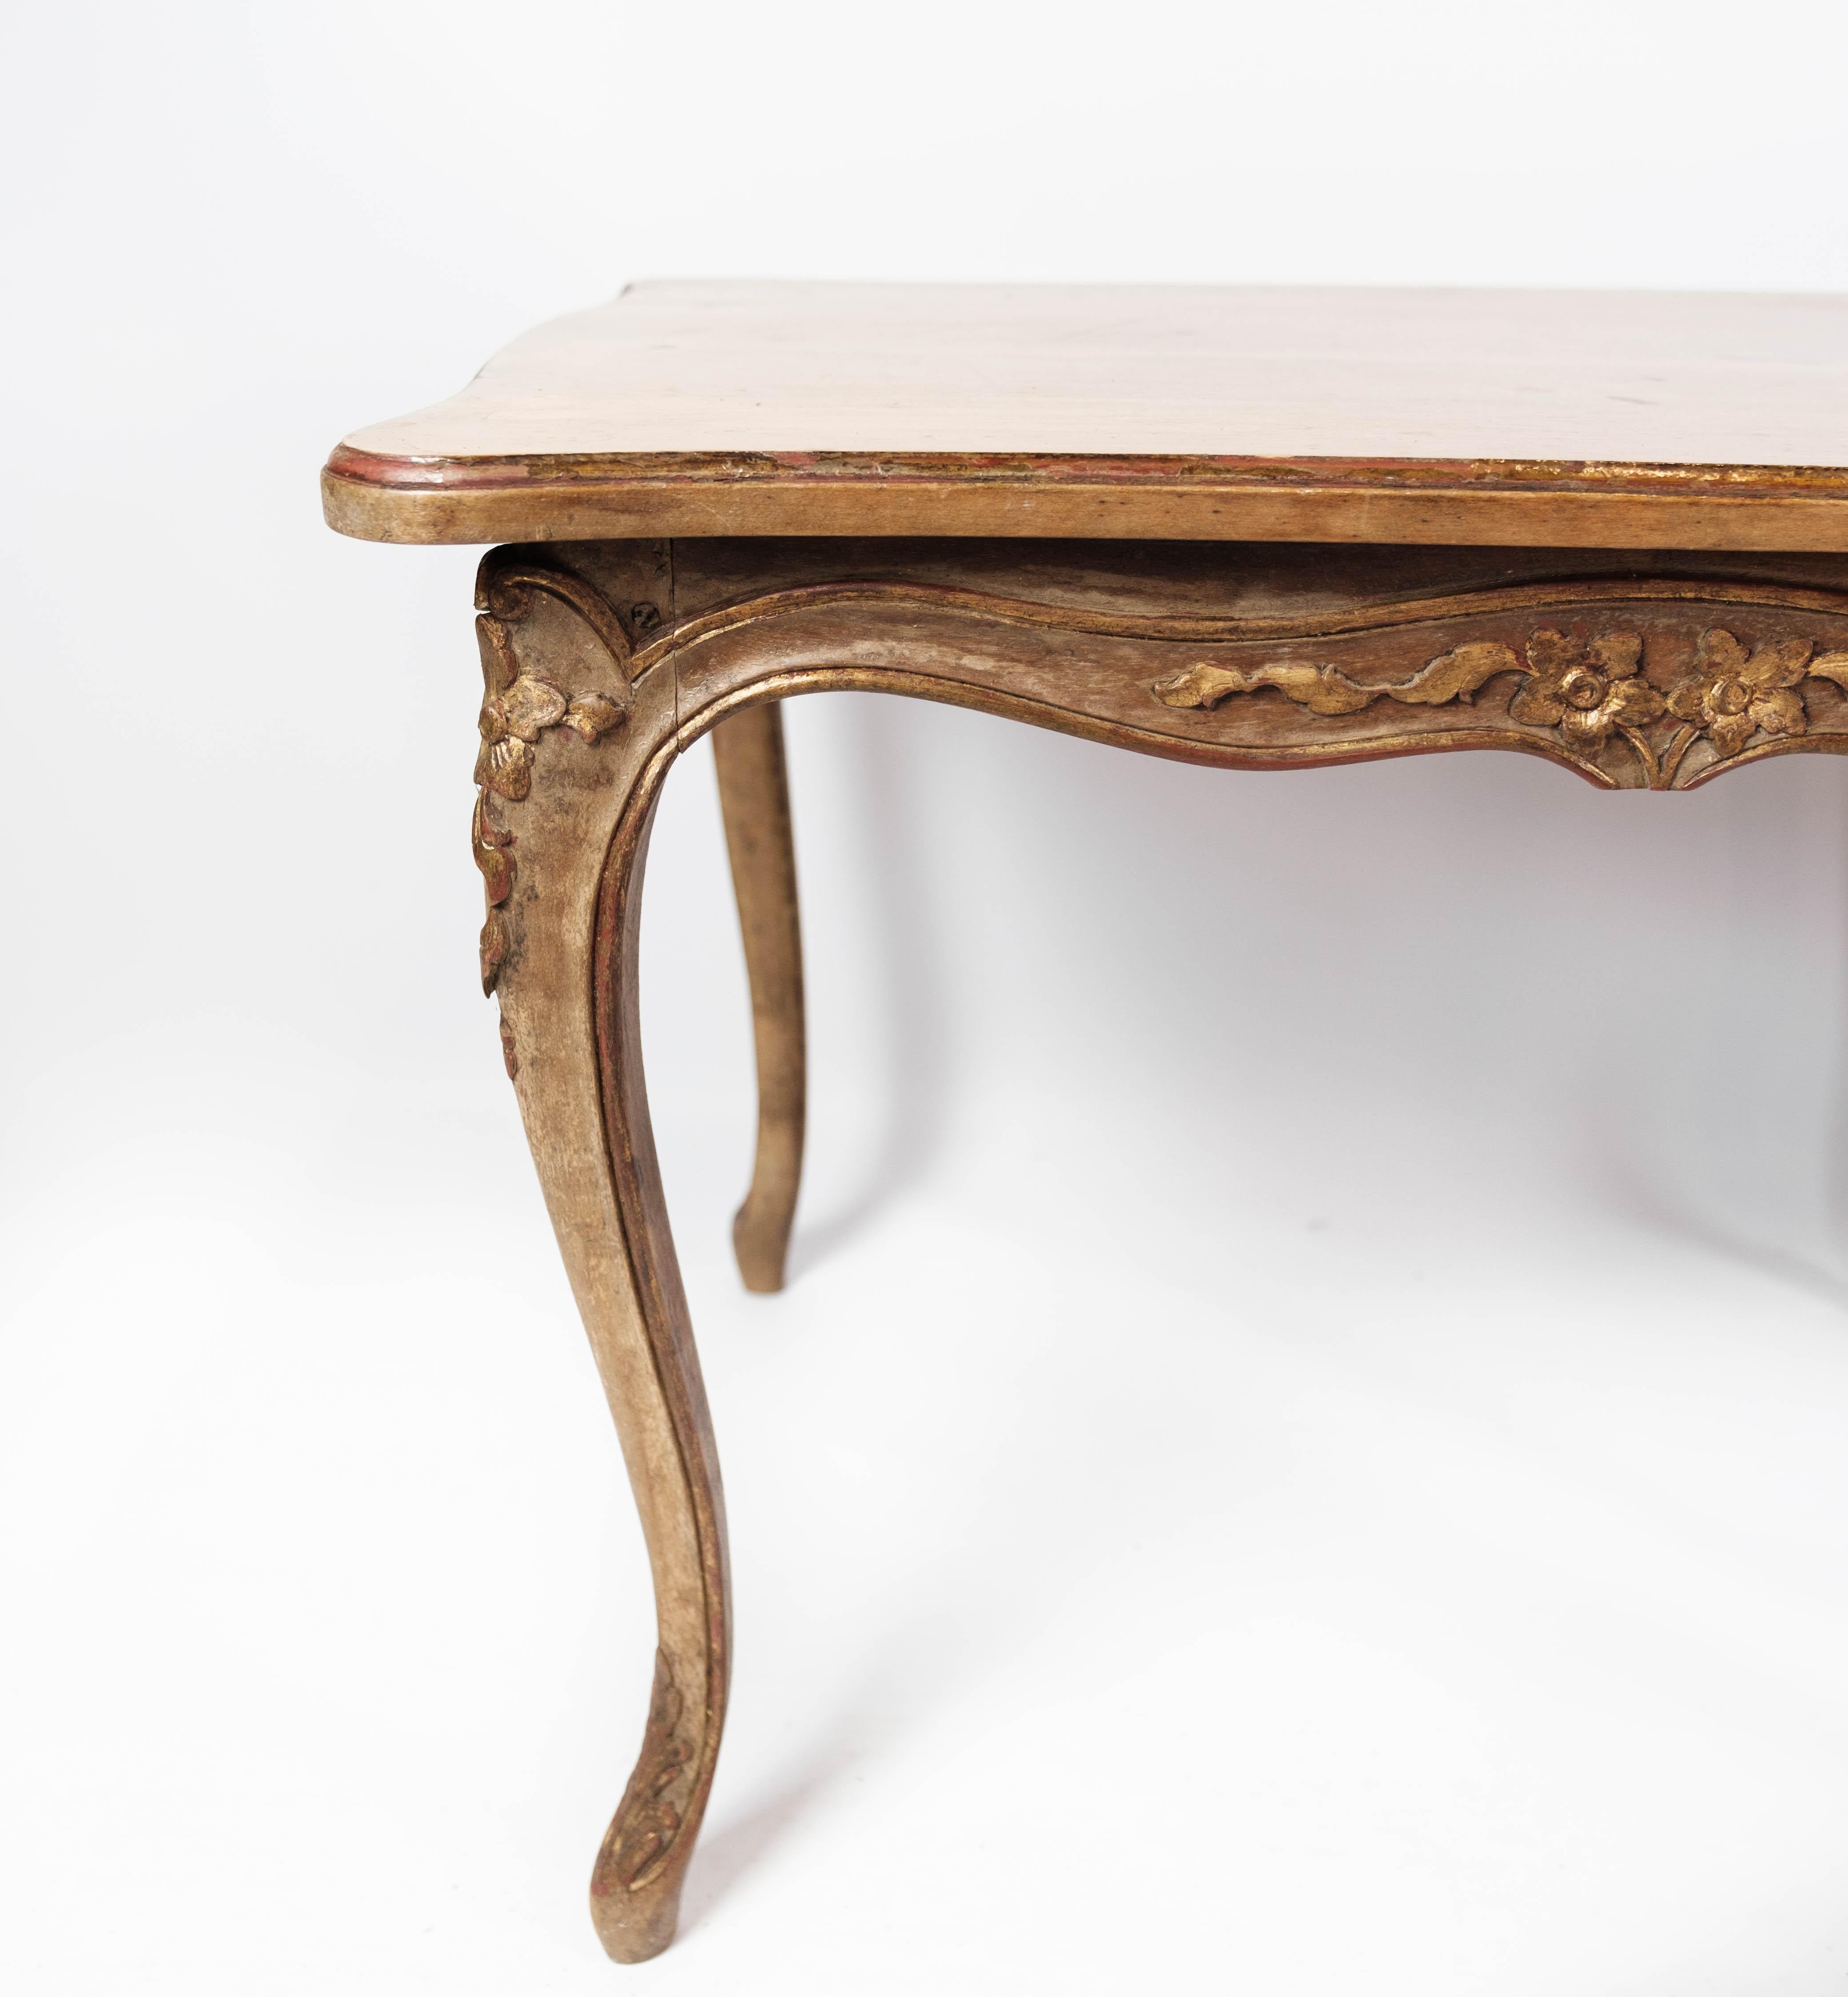 Rococo Revival New Rococo Coffee Table of Light Walnut Decorated with Carvings, 1930s